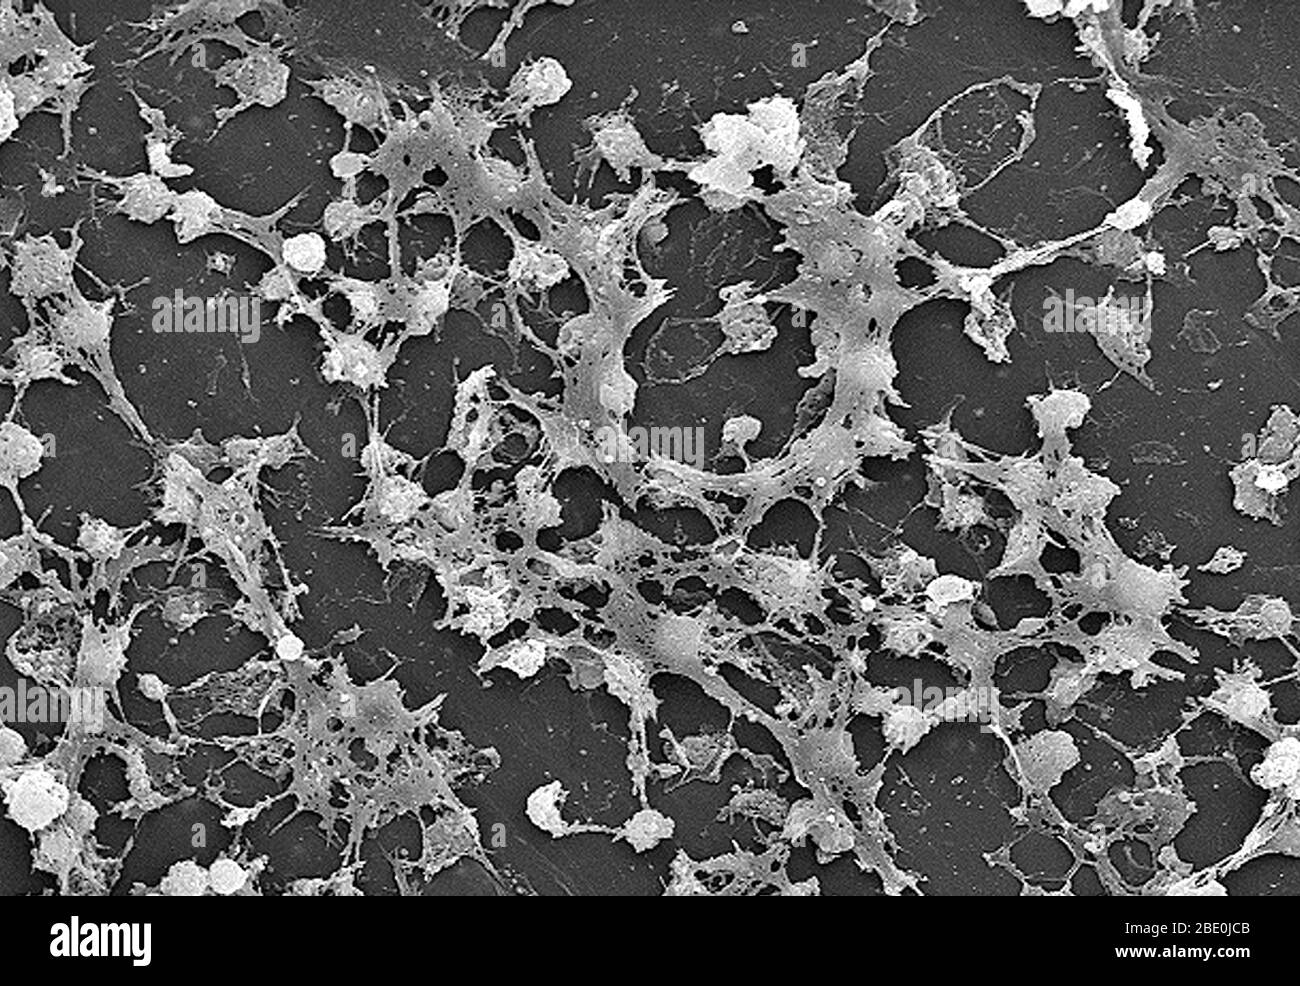 Scanning Electron Micrograph (SEM) depicting large numbers of Staphylococcus aureus bacteria, which were found on the luminal surface of an indwelling catheter. Of importance is the sticky-looking substance woven between the round cocci bacteria, which was composed of polysaccharides, and is known as biofilm. This biofilm has been found to protect the bacteria that secrete the substance from attacks by antimicrobial agents such as antibiotics. Staphylococcus aureus, also known as ''golden staph'' and Oro staphira, is a facultative anaerobic Gram-positive coccal bacterium. Staph bacteria are on Stock Photo